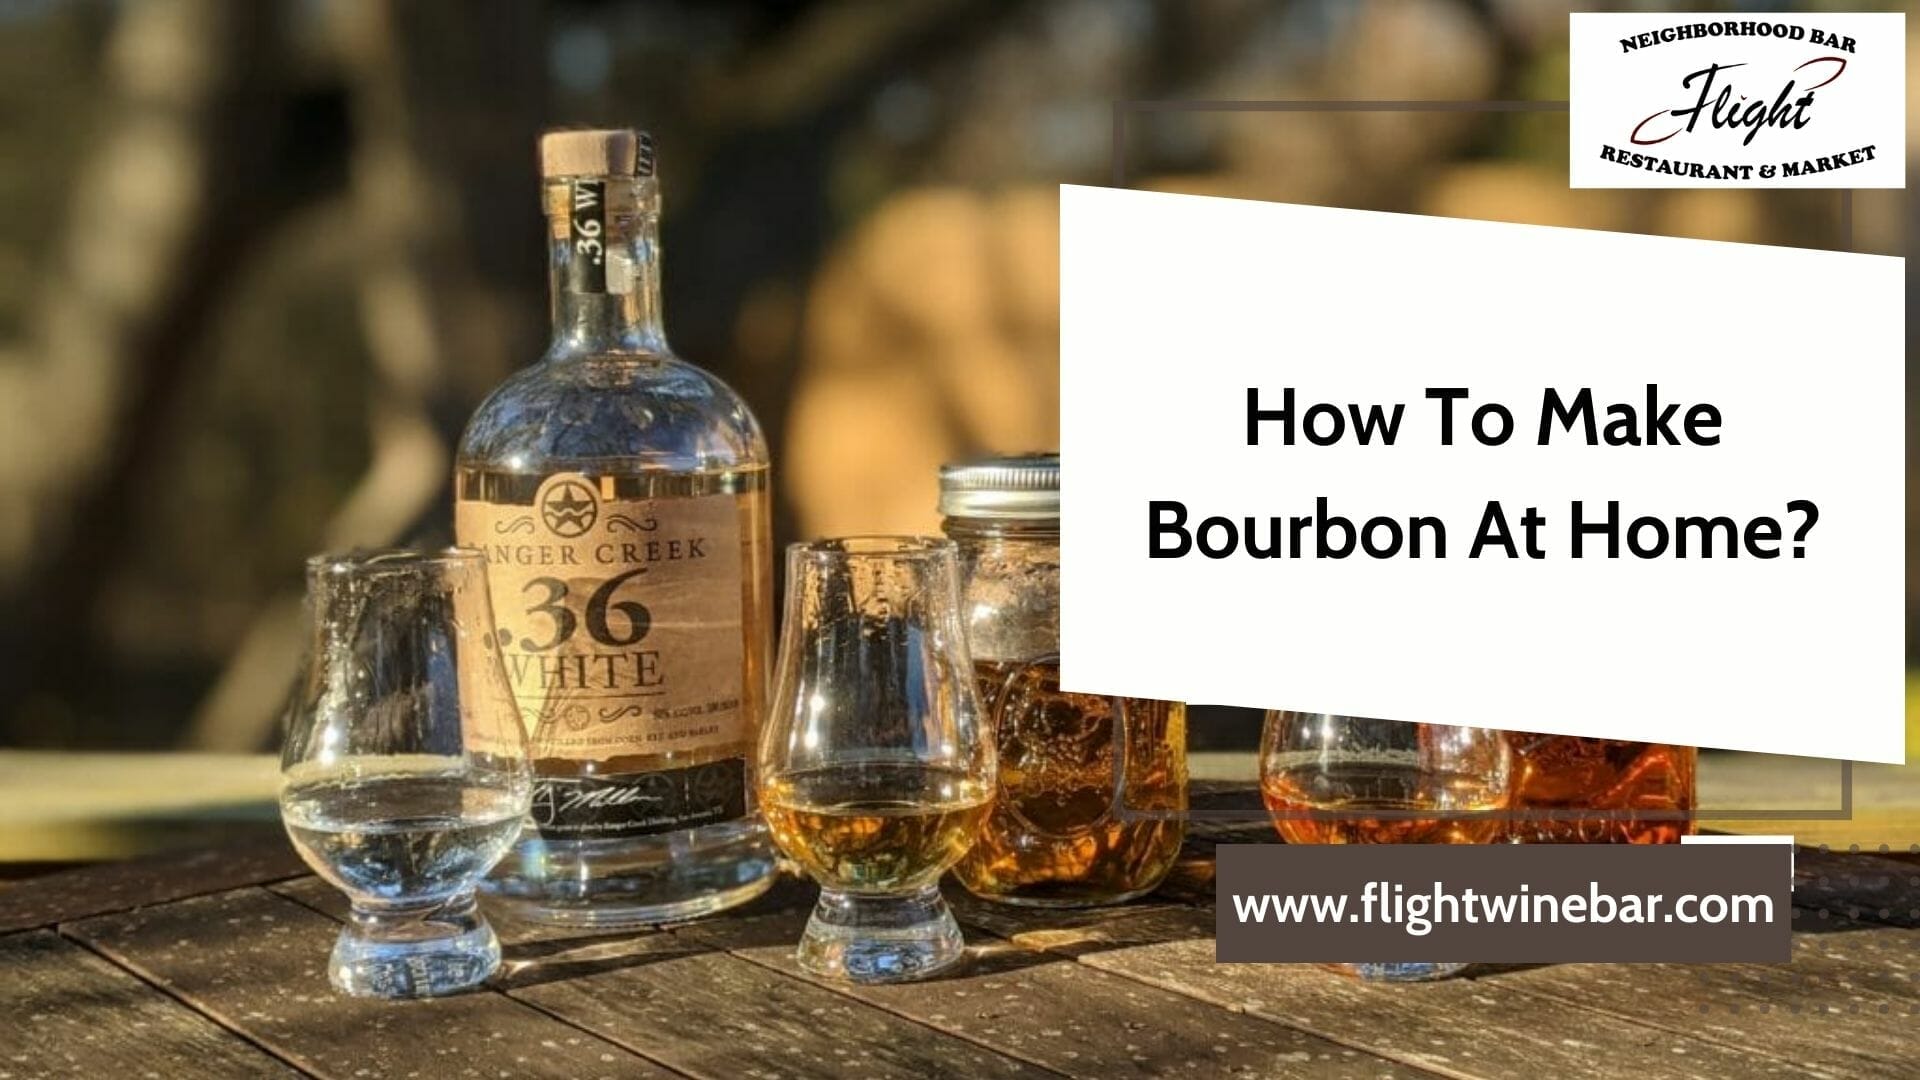 ﻿How To Make Bourbon At Home